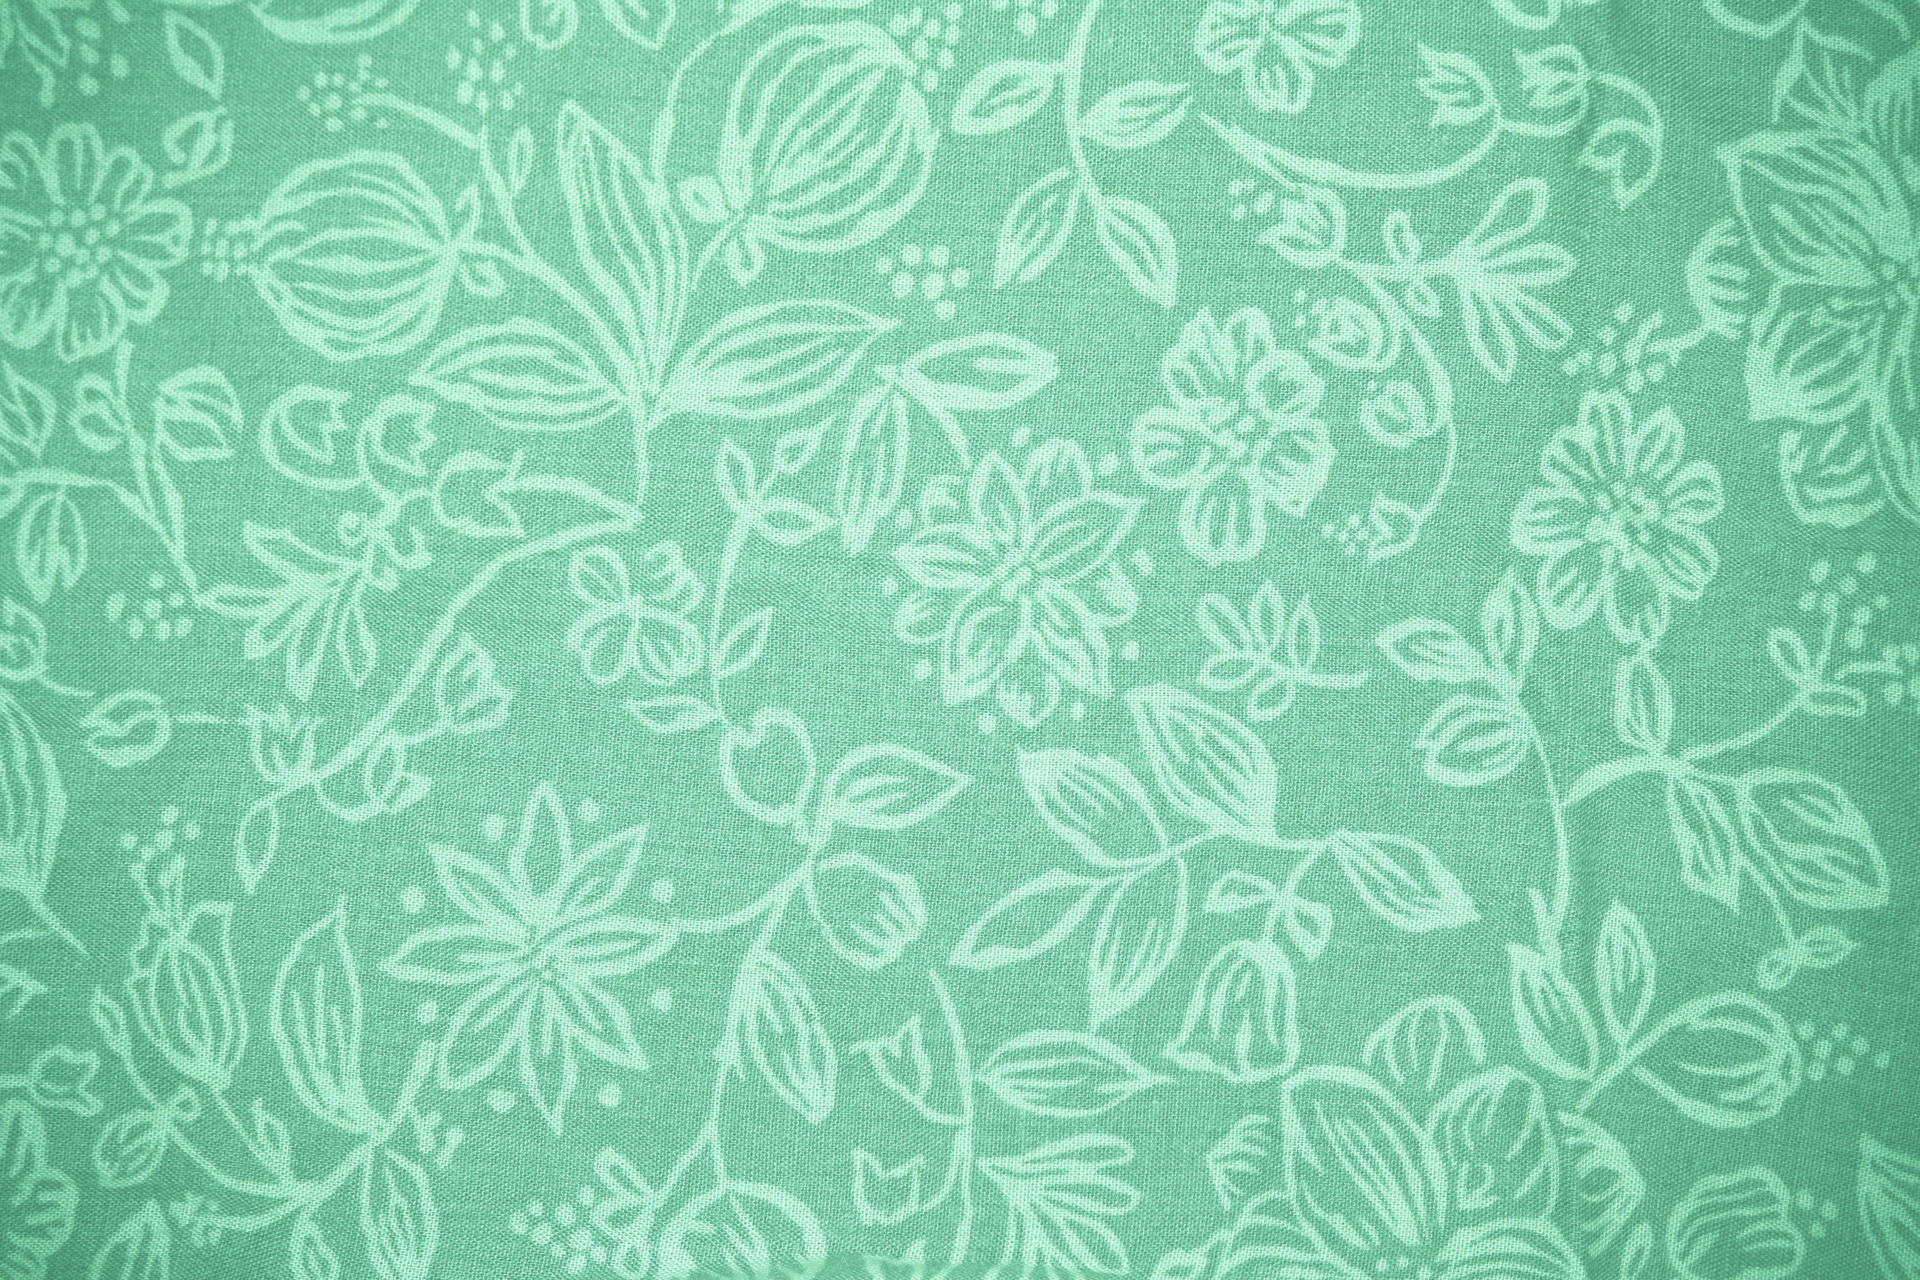 Patterned Sage Green Aesthetic Wallpaper